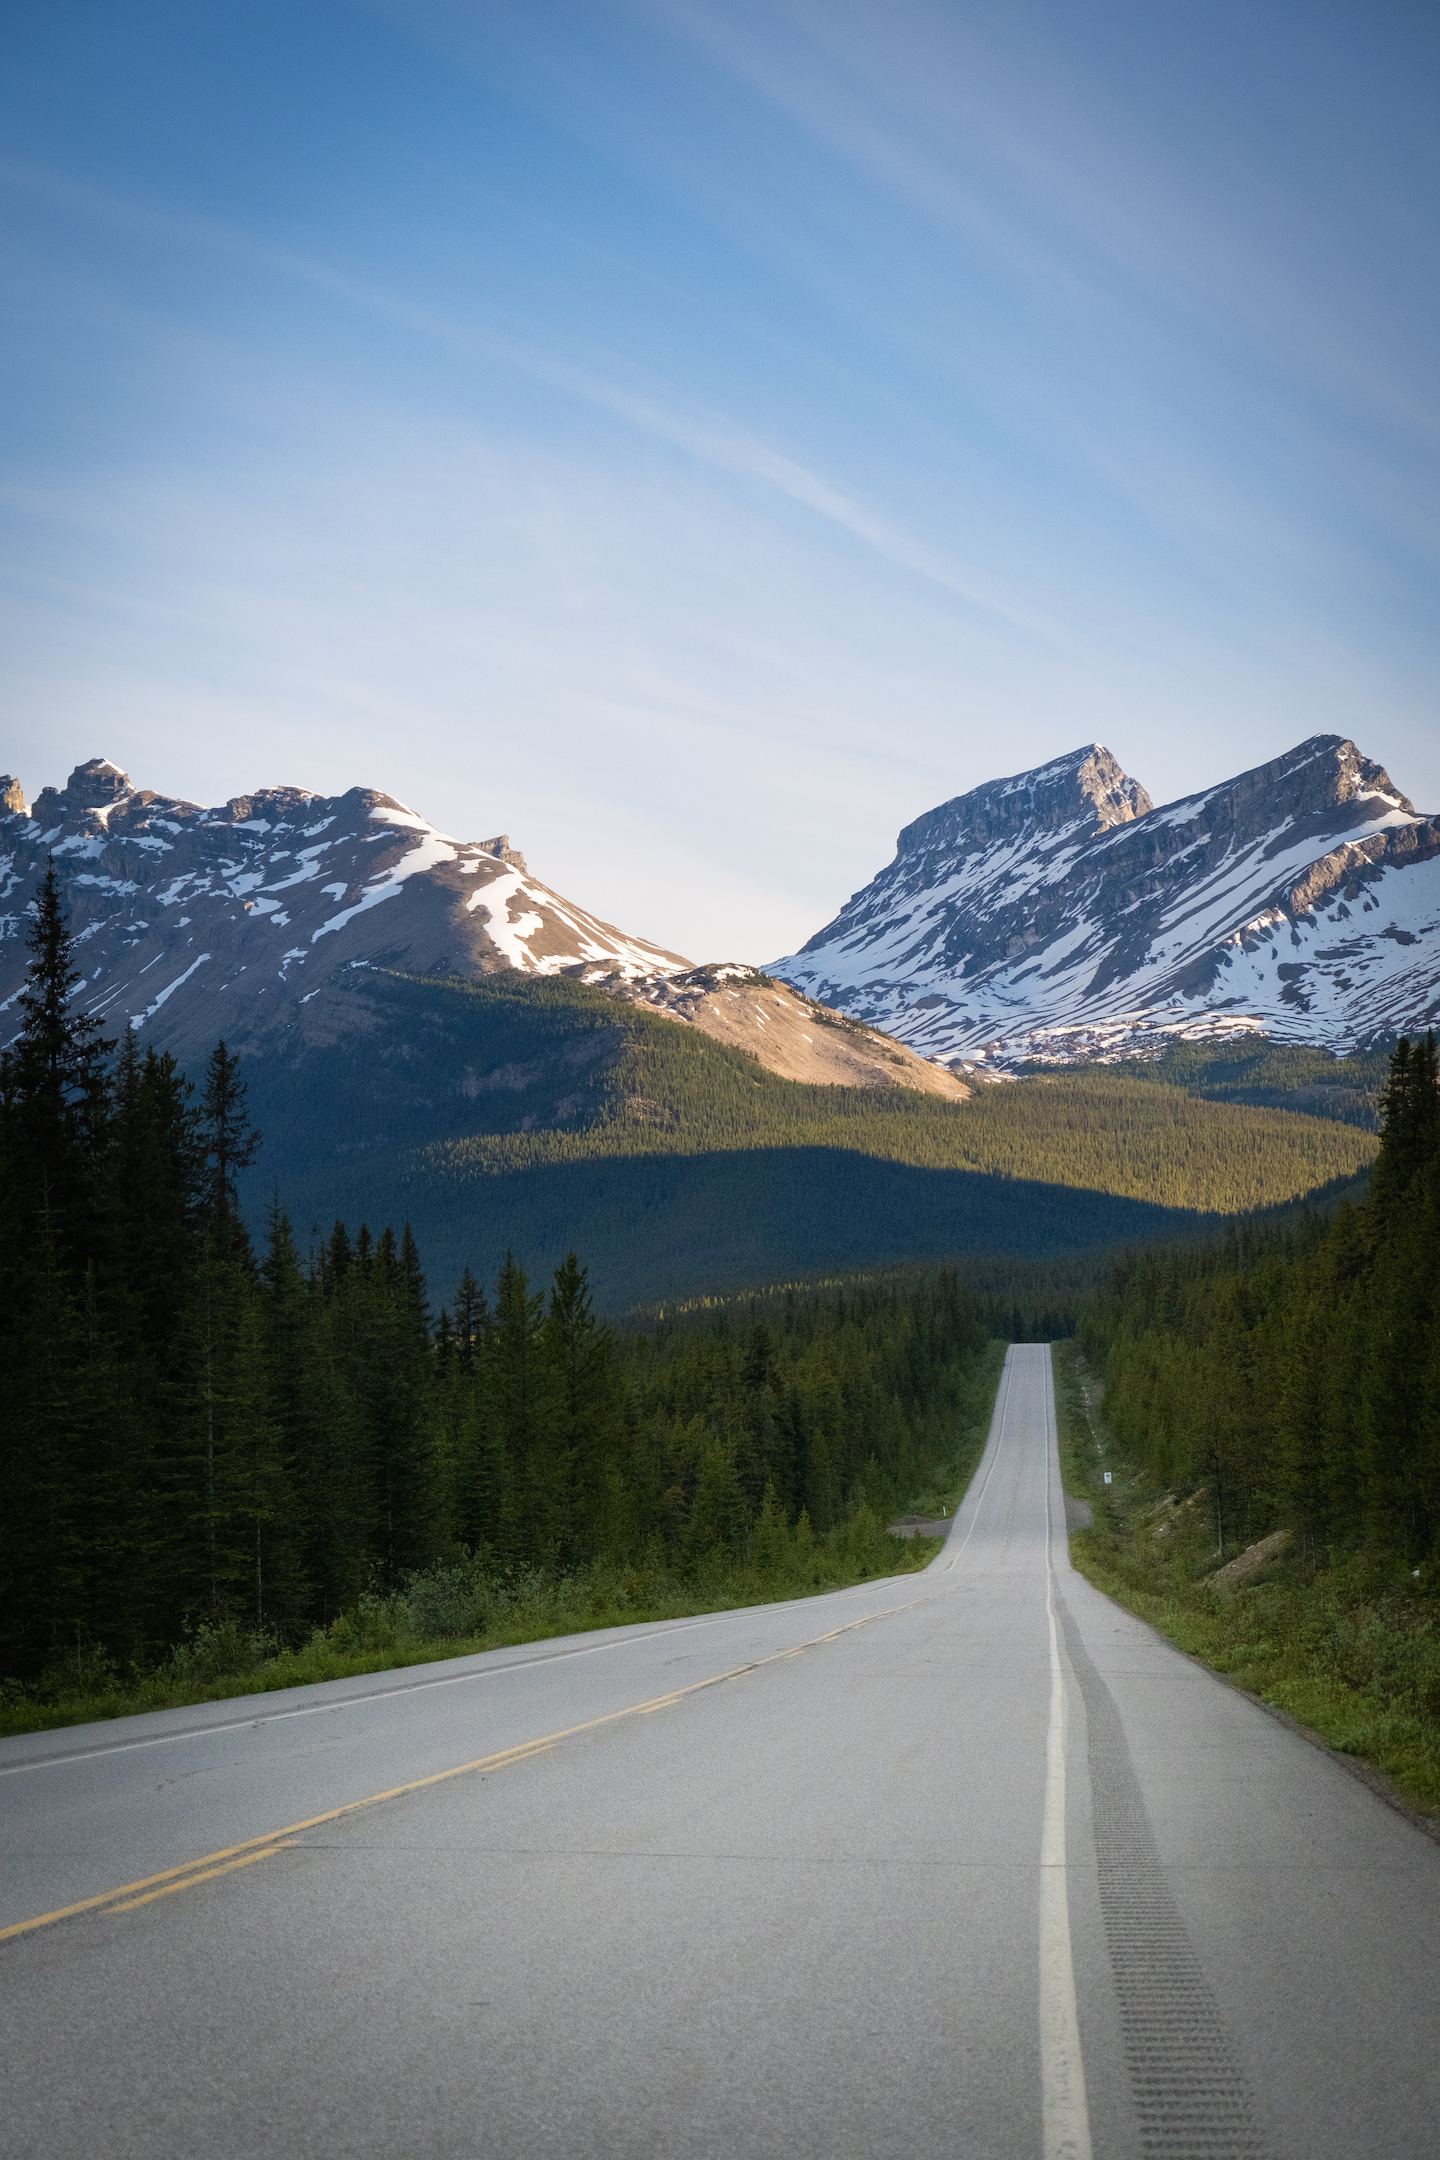 icefields parkway - Lake louise to jasper